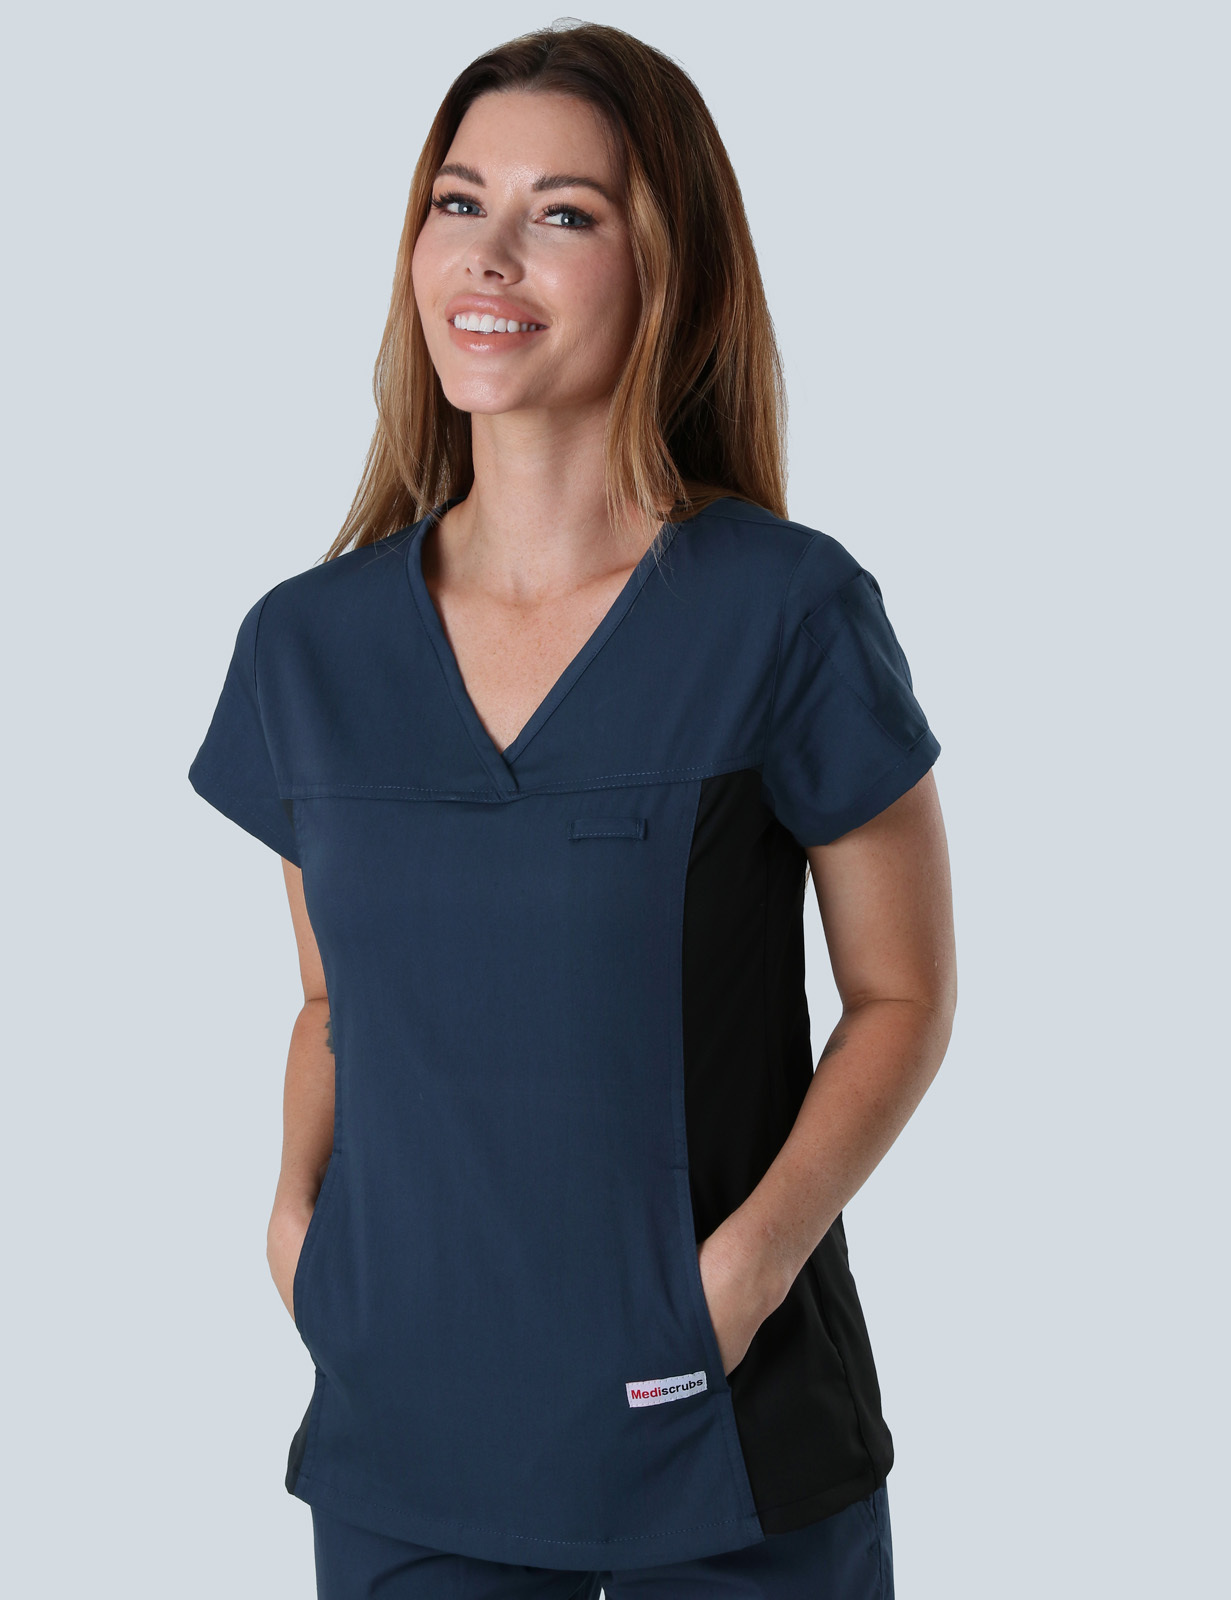 Gladstone Hospital - ED EN (Women's Fit Spandex Scrub Top and Cargo Pants in Navy incl Logos)